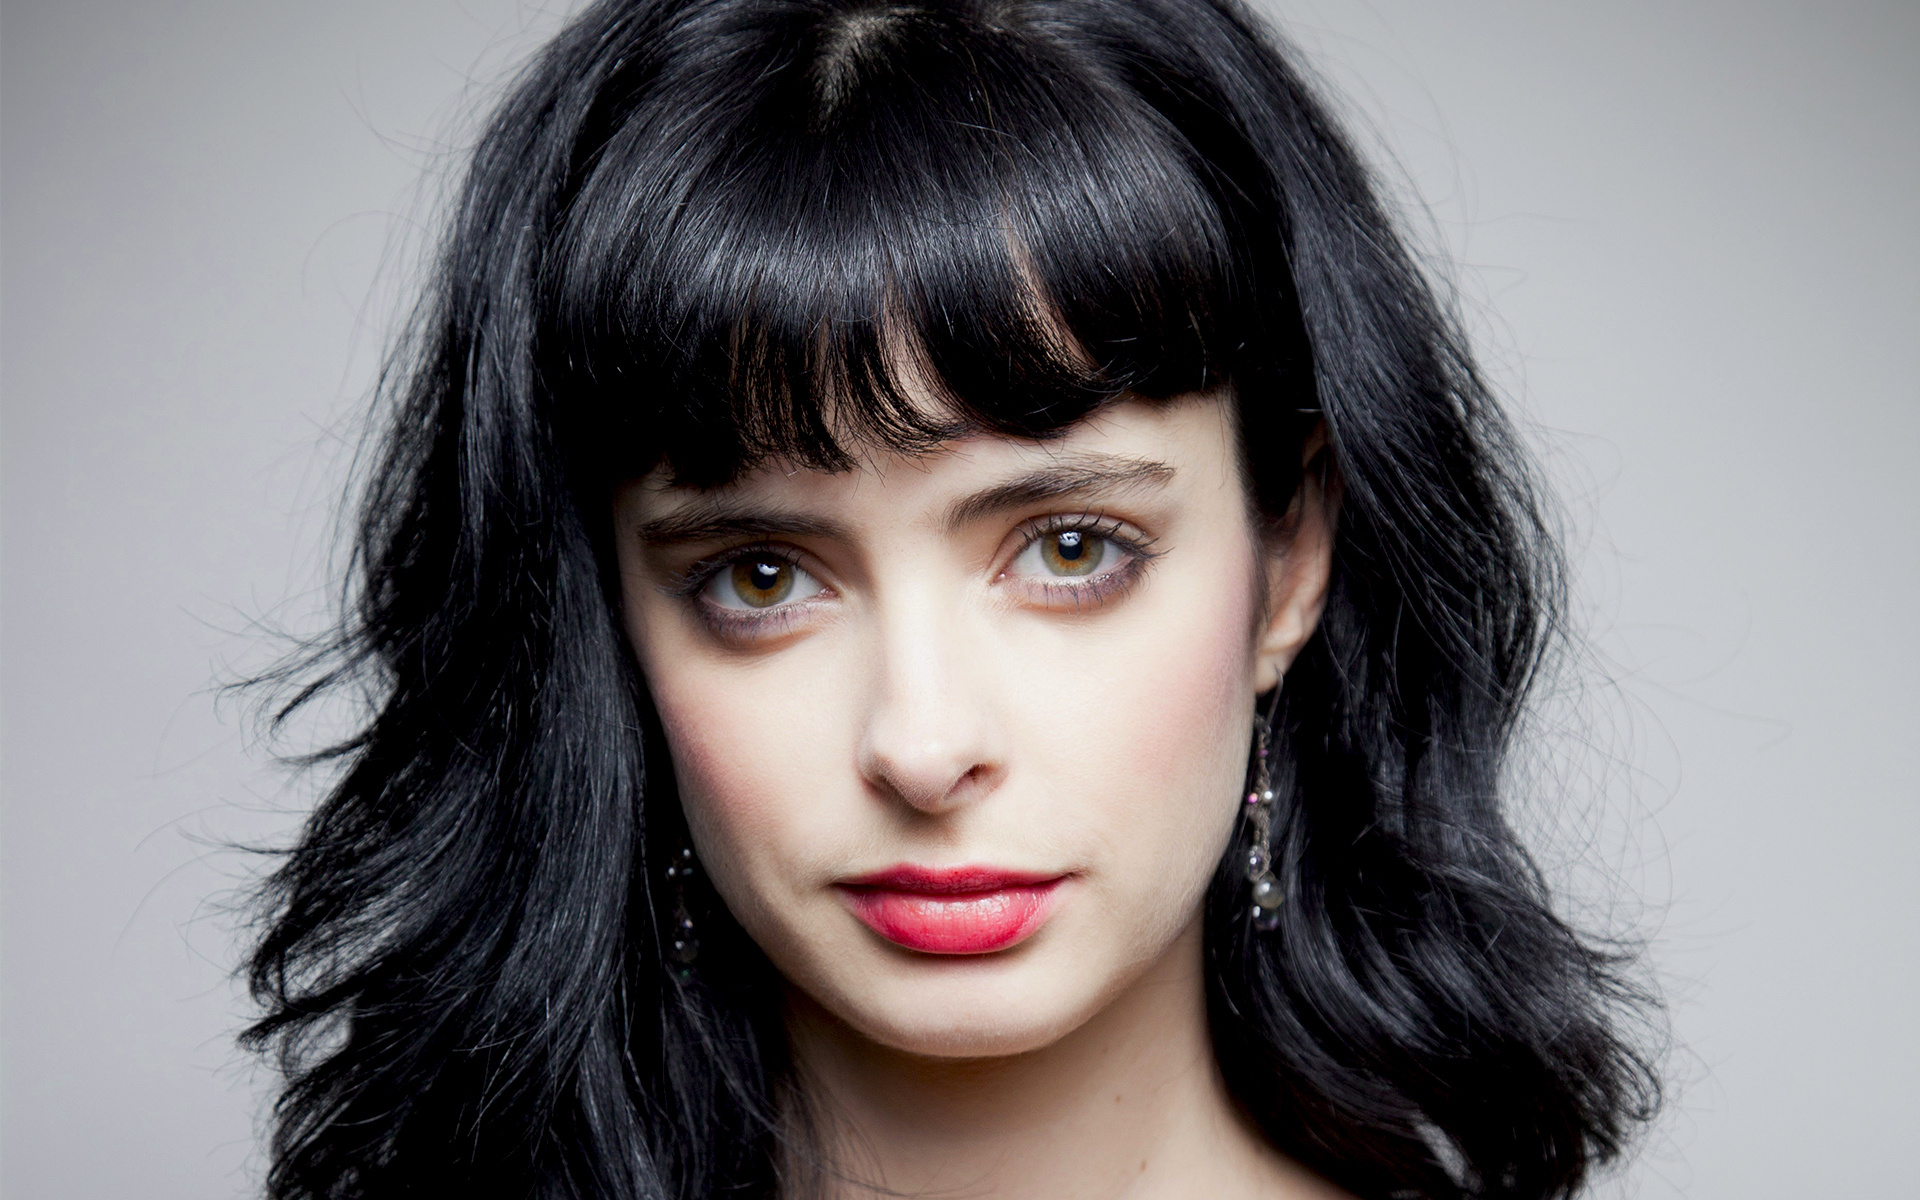 Krysten Ritter, Stylish wallpapers, Striking images, Background pictures, 1920x1200 HD Desktop